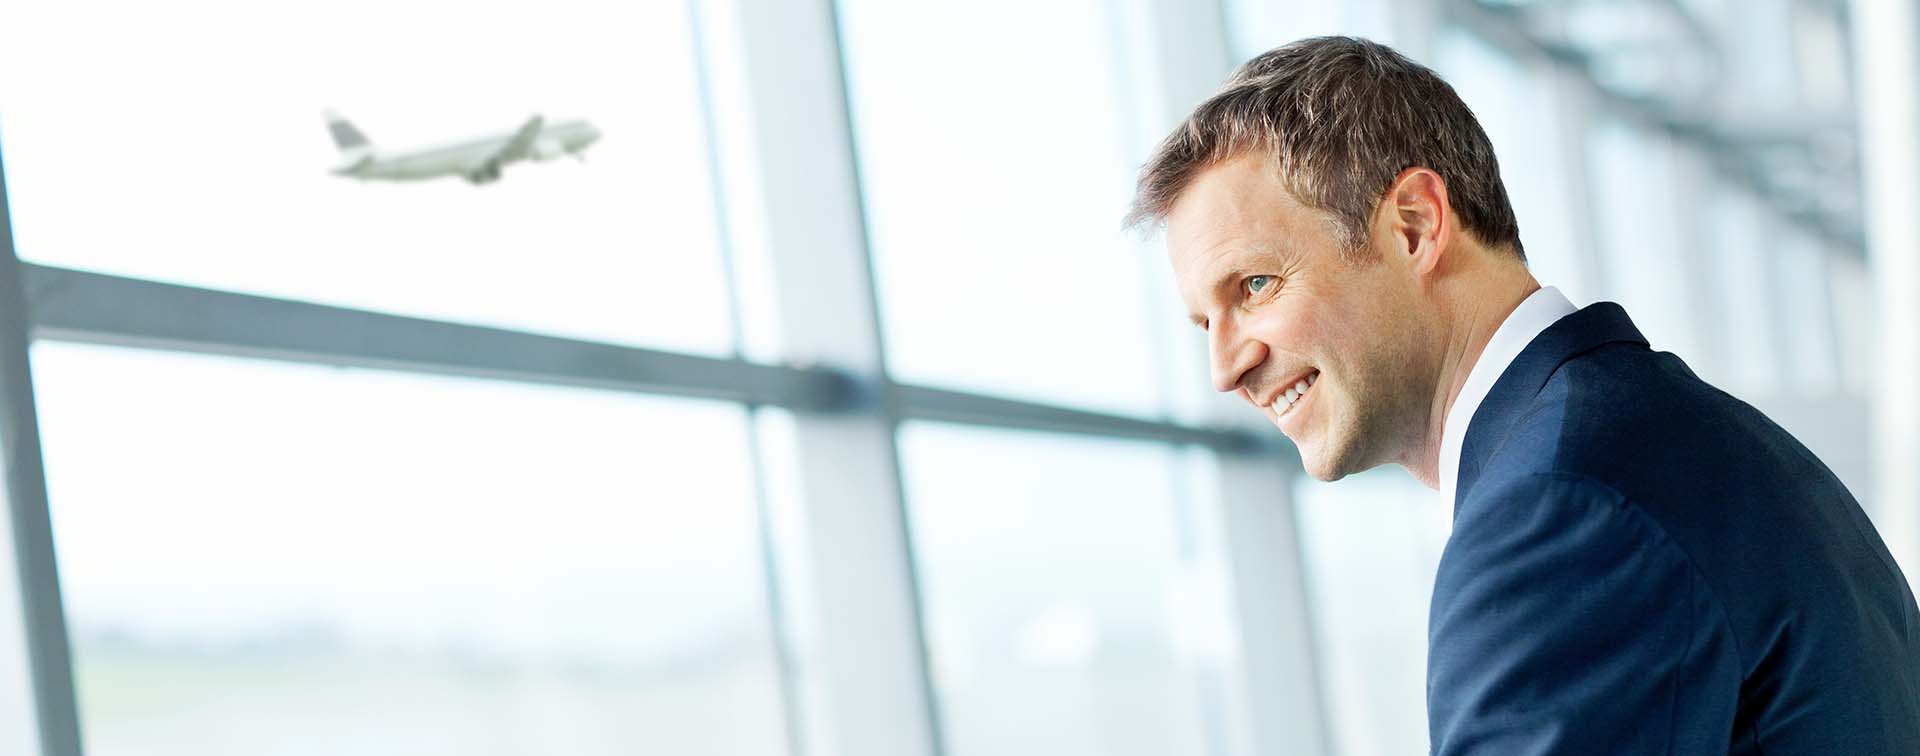 Smiling businessman looking to the left in front of large glass airport window as a plane takes off from the runway in the background